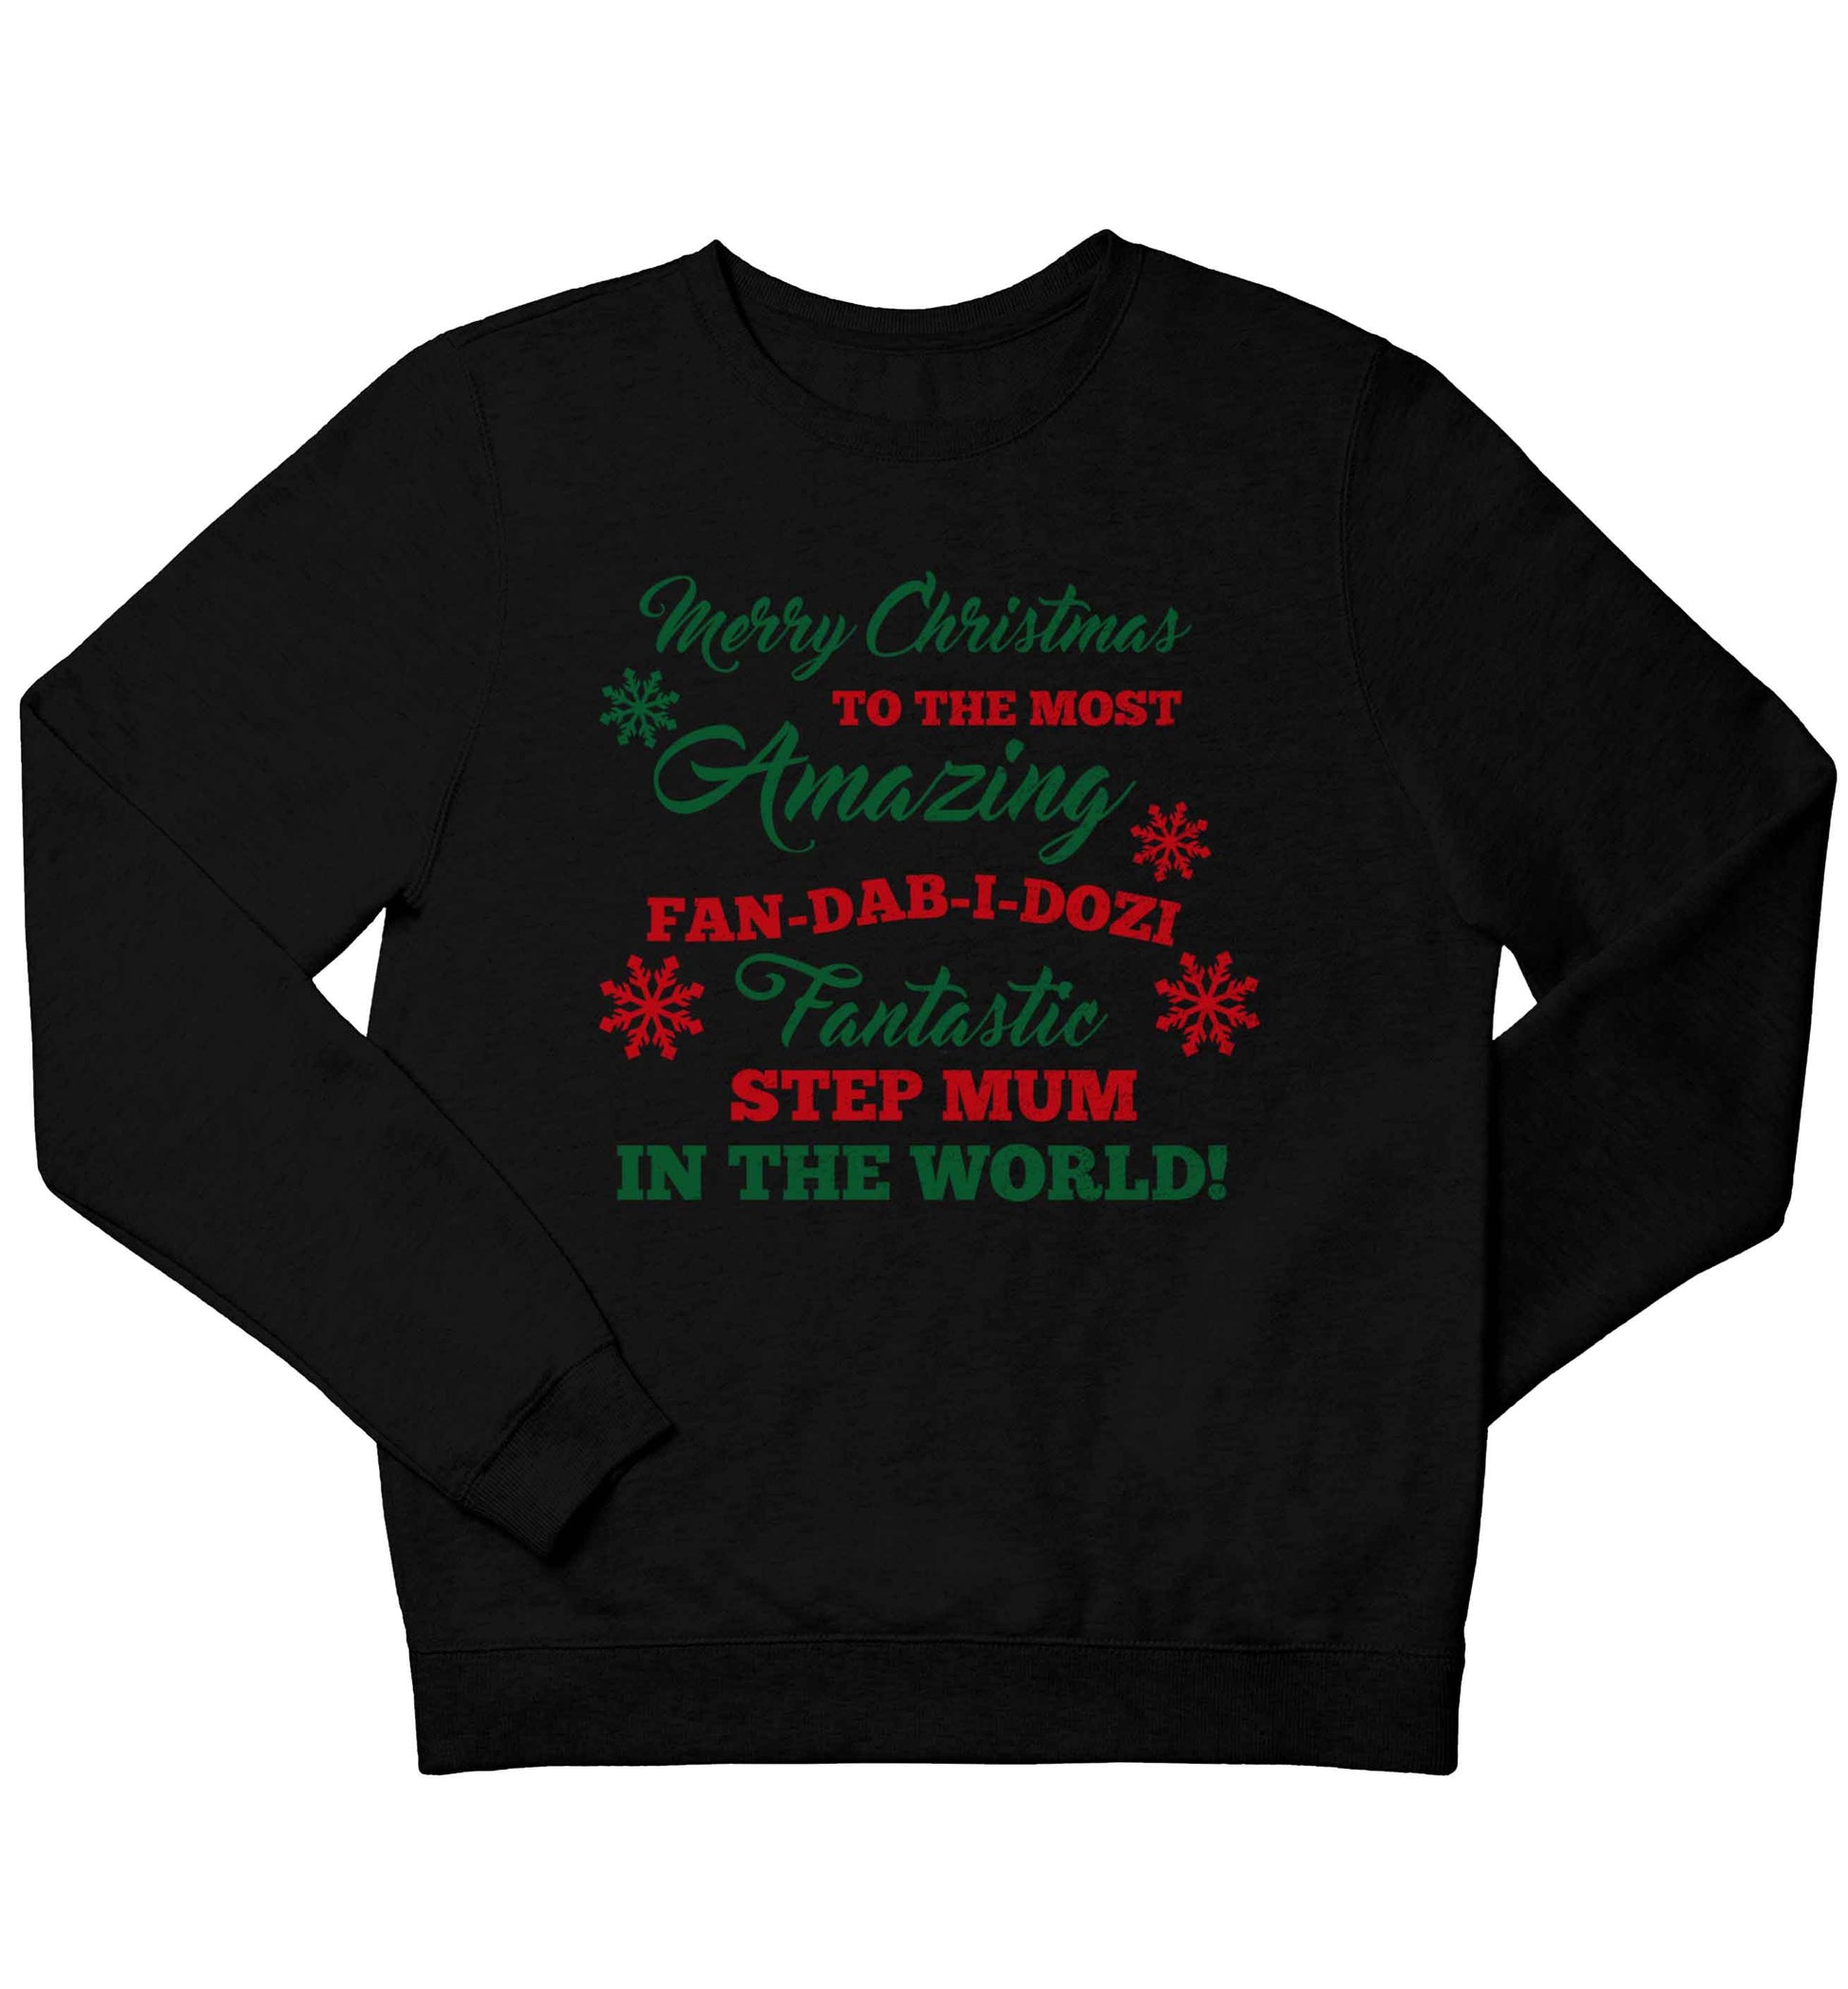 Merry Christmas to the most amazing fan-dab-i-dozi fantasic Step Mum in the world children's black sweater 12-13 Years